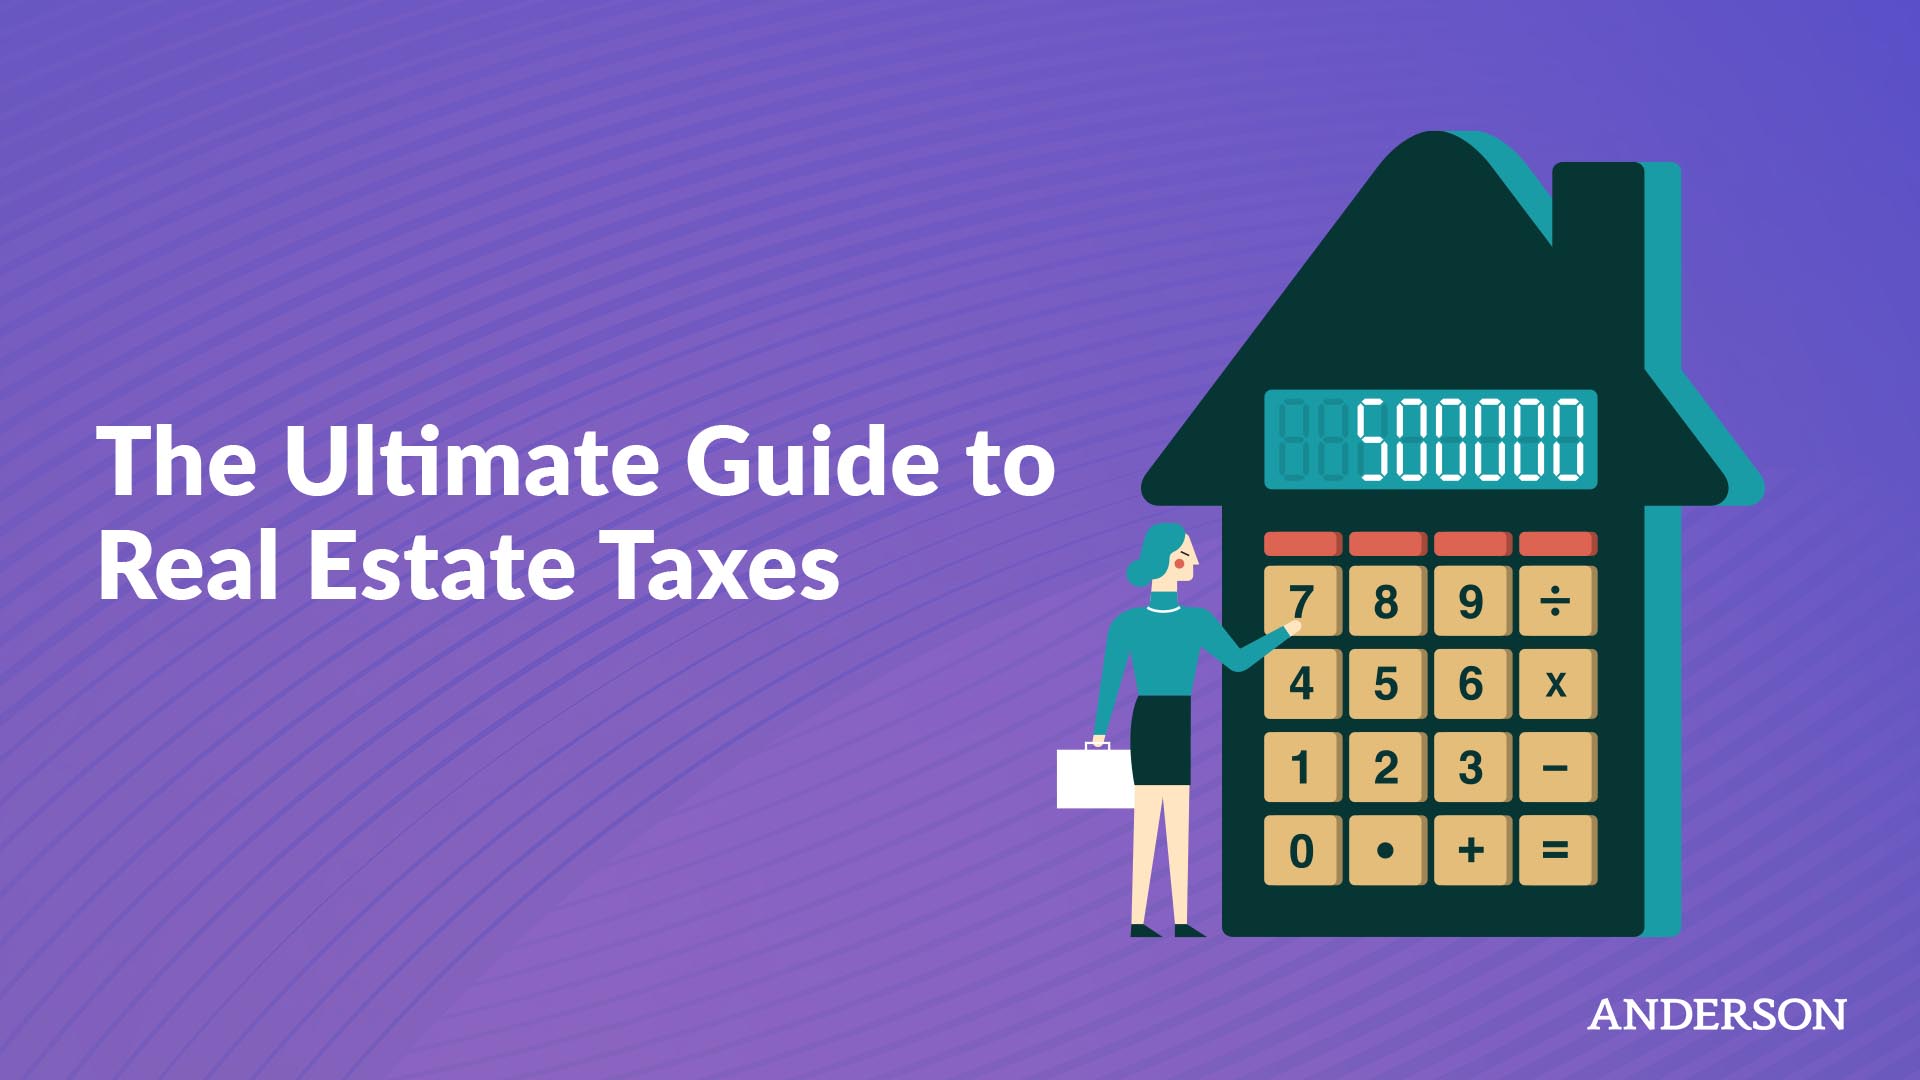 Here is your The Ultimate Guide to Real Estate Taxes